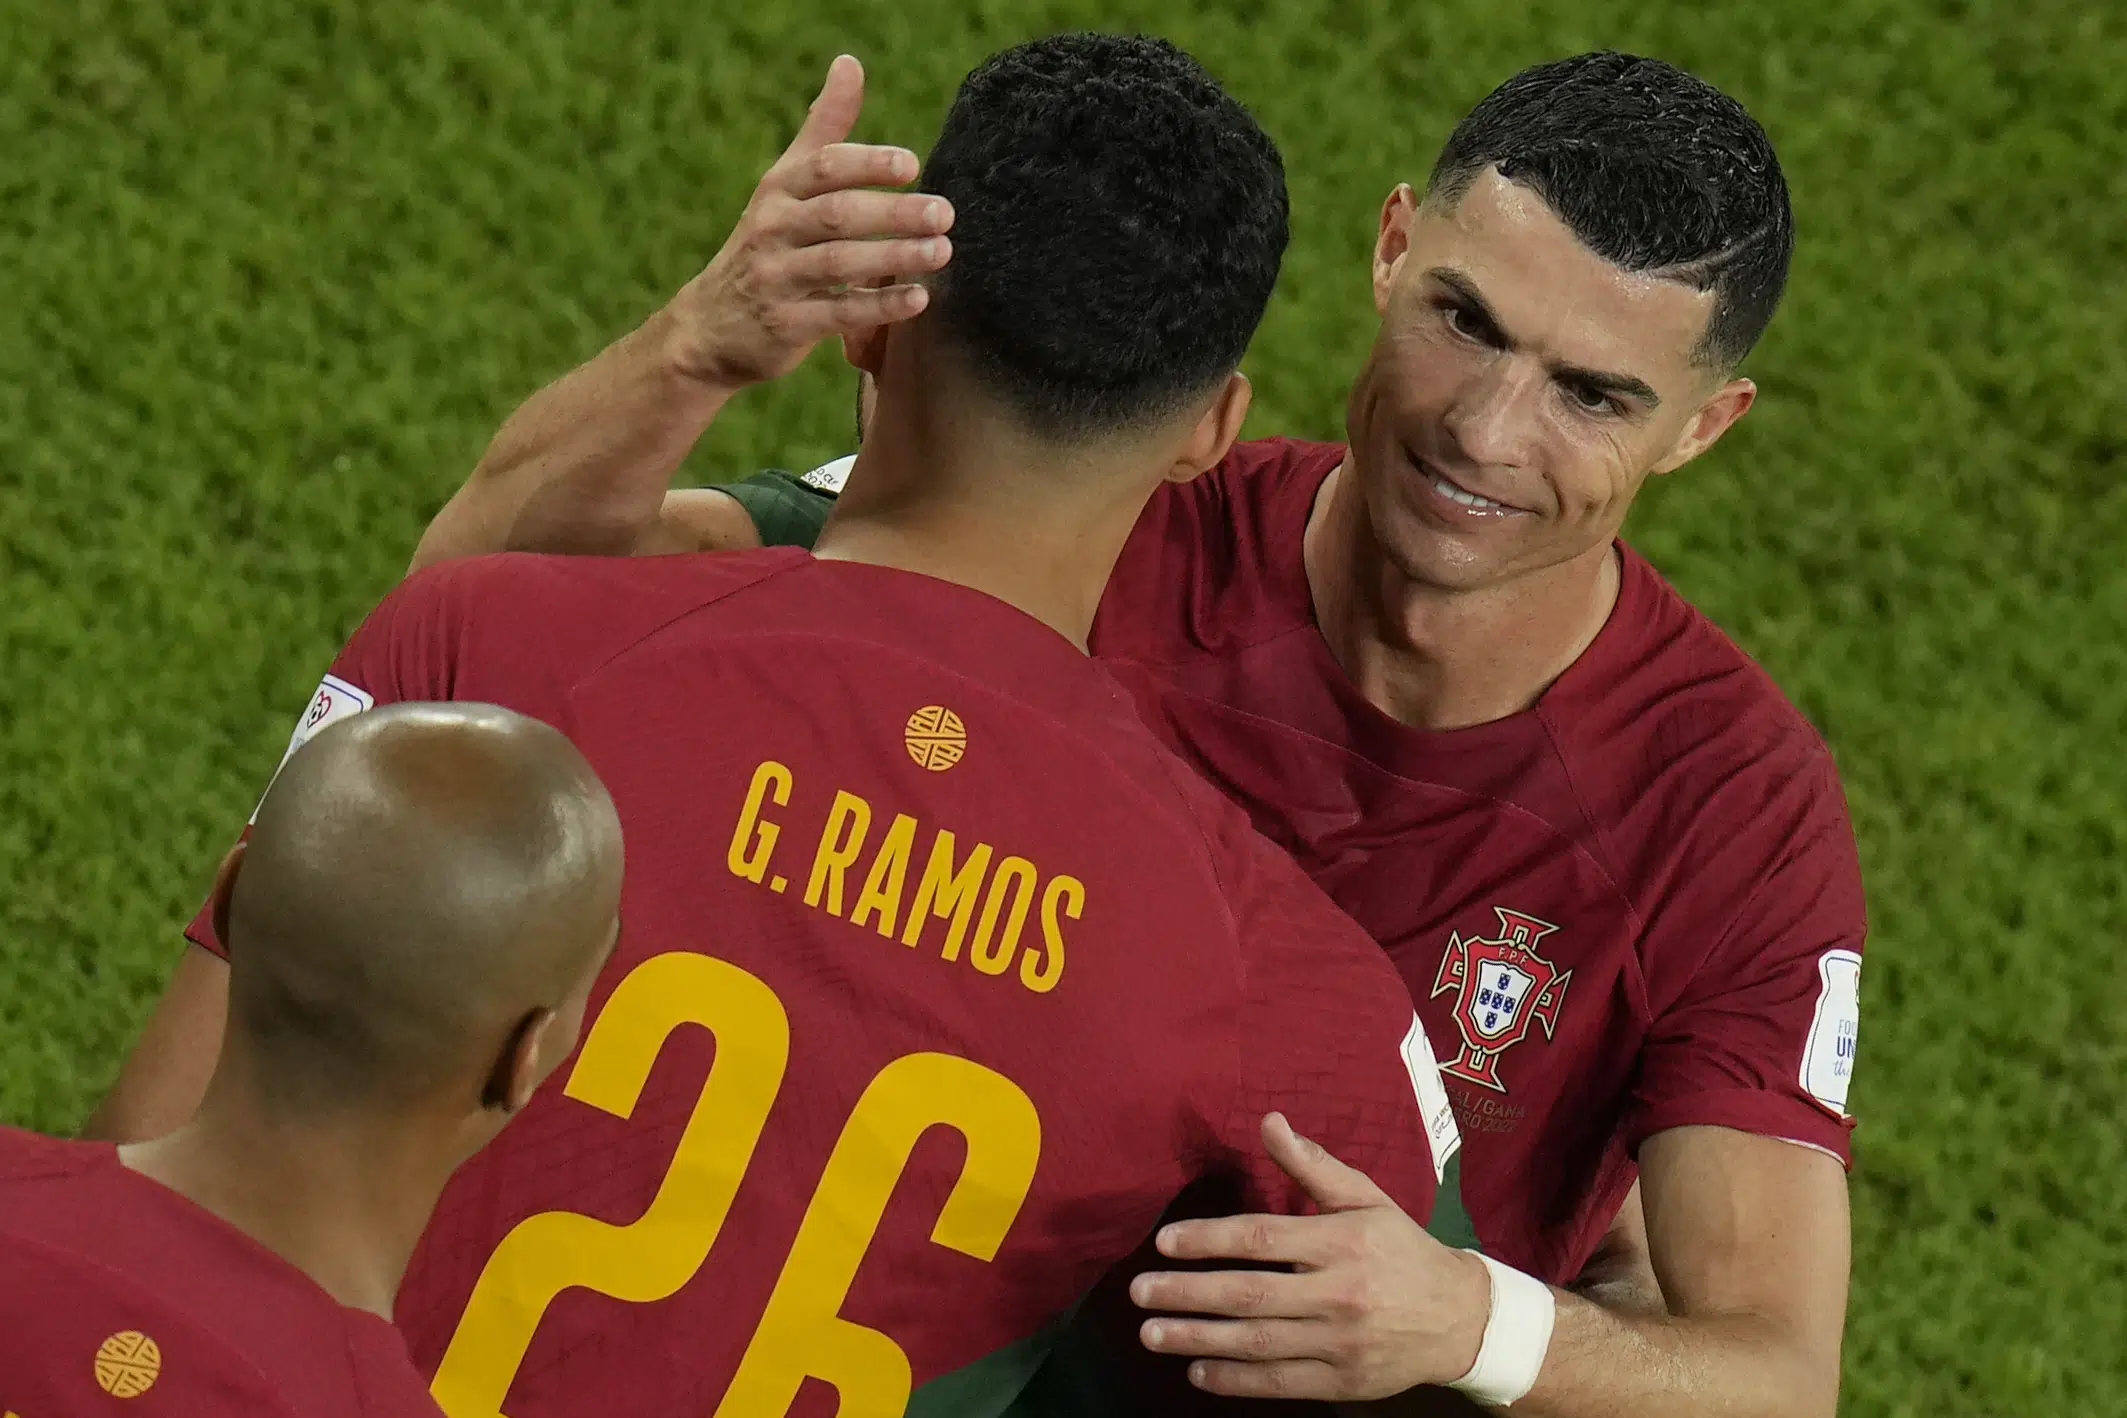 Ronaldo fell, Ramos scores 3 for Portugal at World Cup